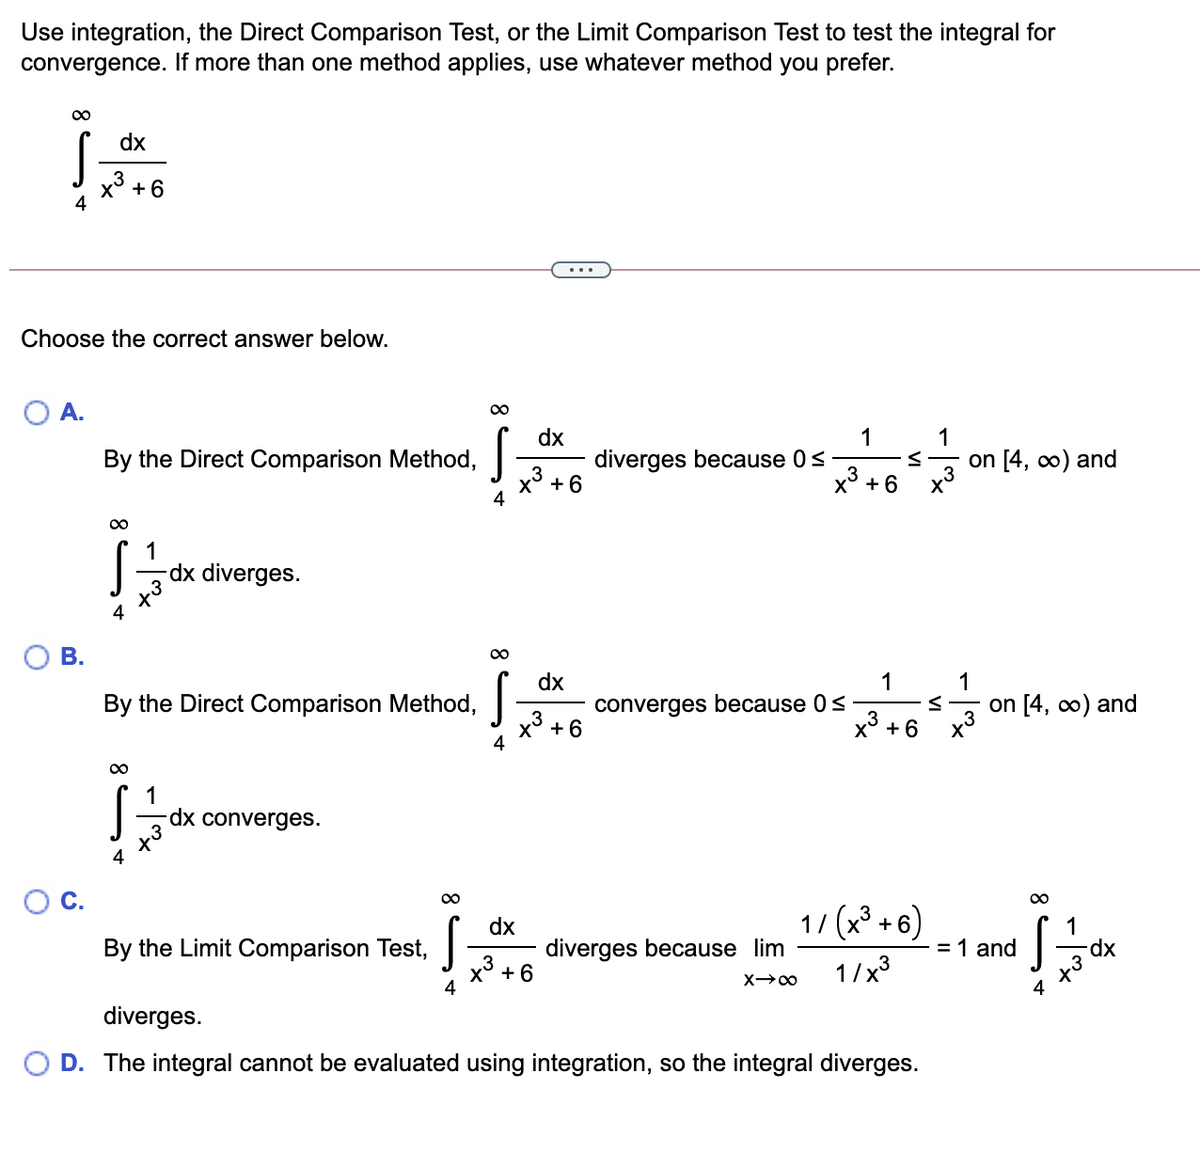 Use integration, the Direct Comparison Test, or the Limit Comparison Test to test the integral for
convergence. If more than one method applies, use whatever method you prefer.
00
dx
x3 +6
...
Choose the correct answer below.
O A.
dx
diverges because 0s
1
1
By the Direct Comparison Method,
on [4, 0) and
x3 + 6
x3 +6
1
dx diverges.
4
В.
00
dx
1
1
By the Direct Comparison Method,
converges because 0s
3
on [4, co) and
x3 +6
4
x° + 6
dx converges.
С.
00
dx
diverges because lim
1/ (x³ + 6)
1
= 1 and
By the Limit Comparison Test,
x° + 6
4
1/x3
4
diverges.
D. The integral cannot be evaluated using integration, so the integral diverges.
8
